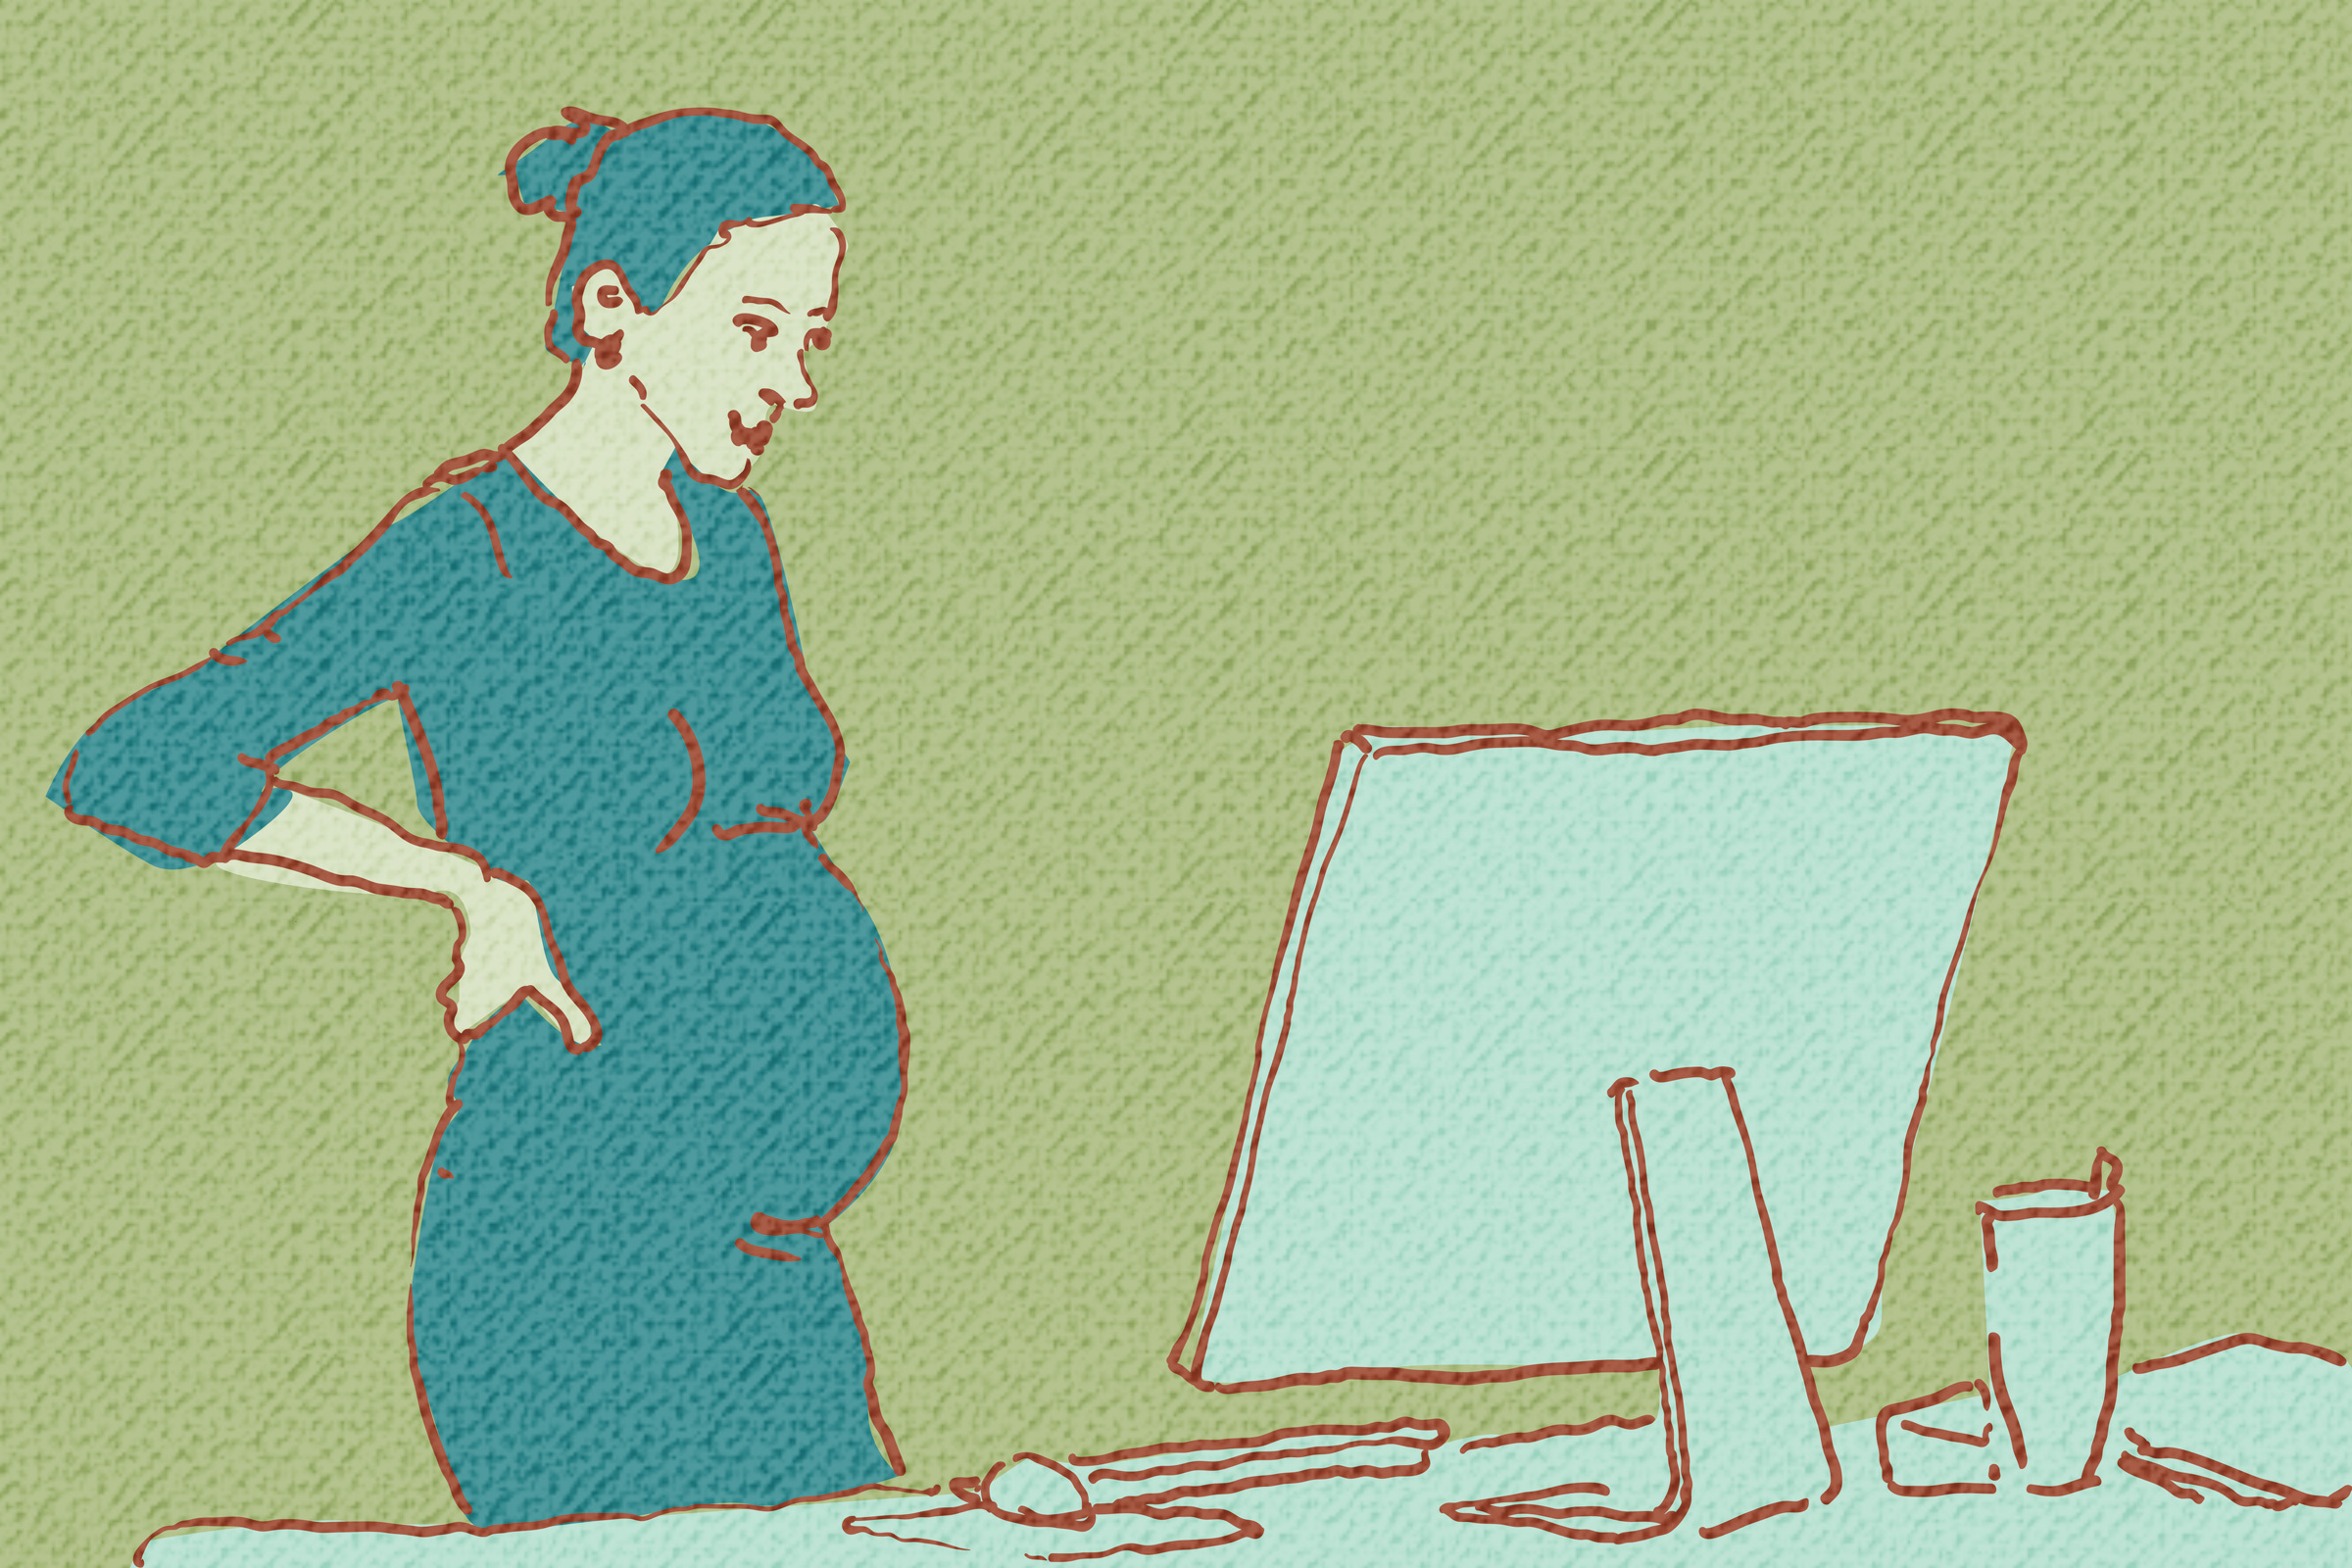 For Executive Women, Is Maternity Leave Necessary? - The New York